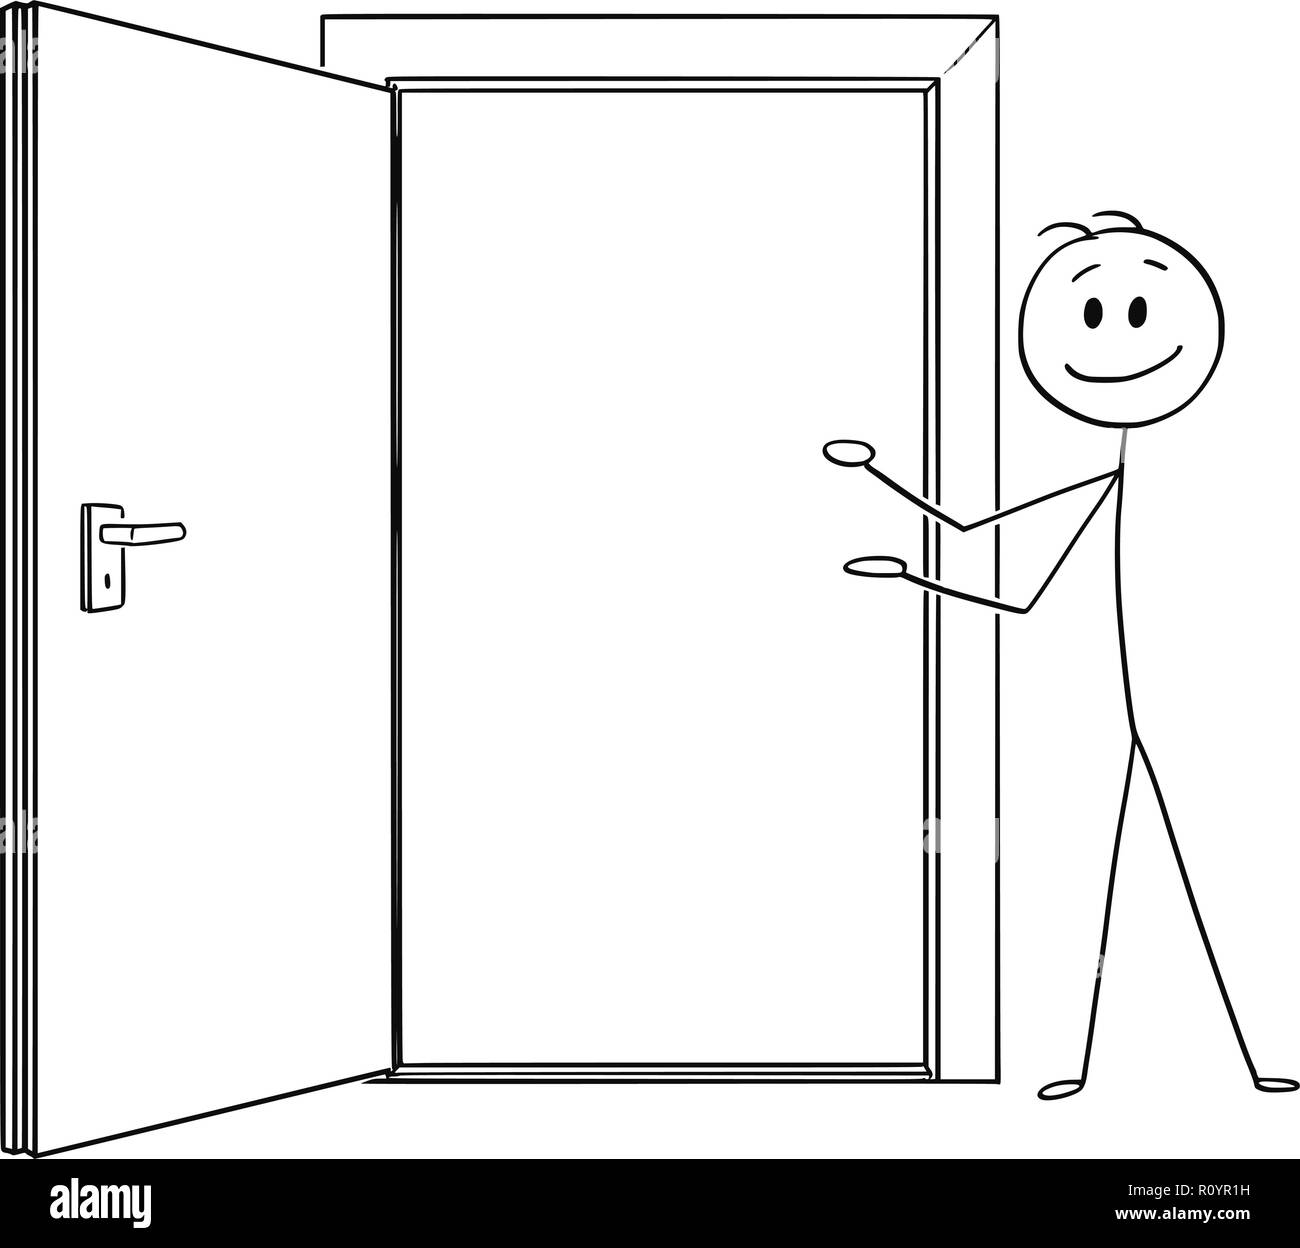 The Open Door Cartoon High Resolution Stock Photography And Images Alamy